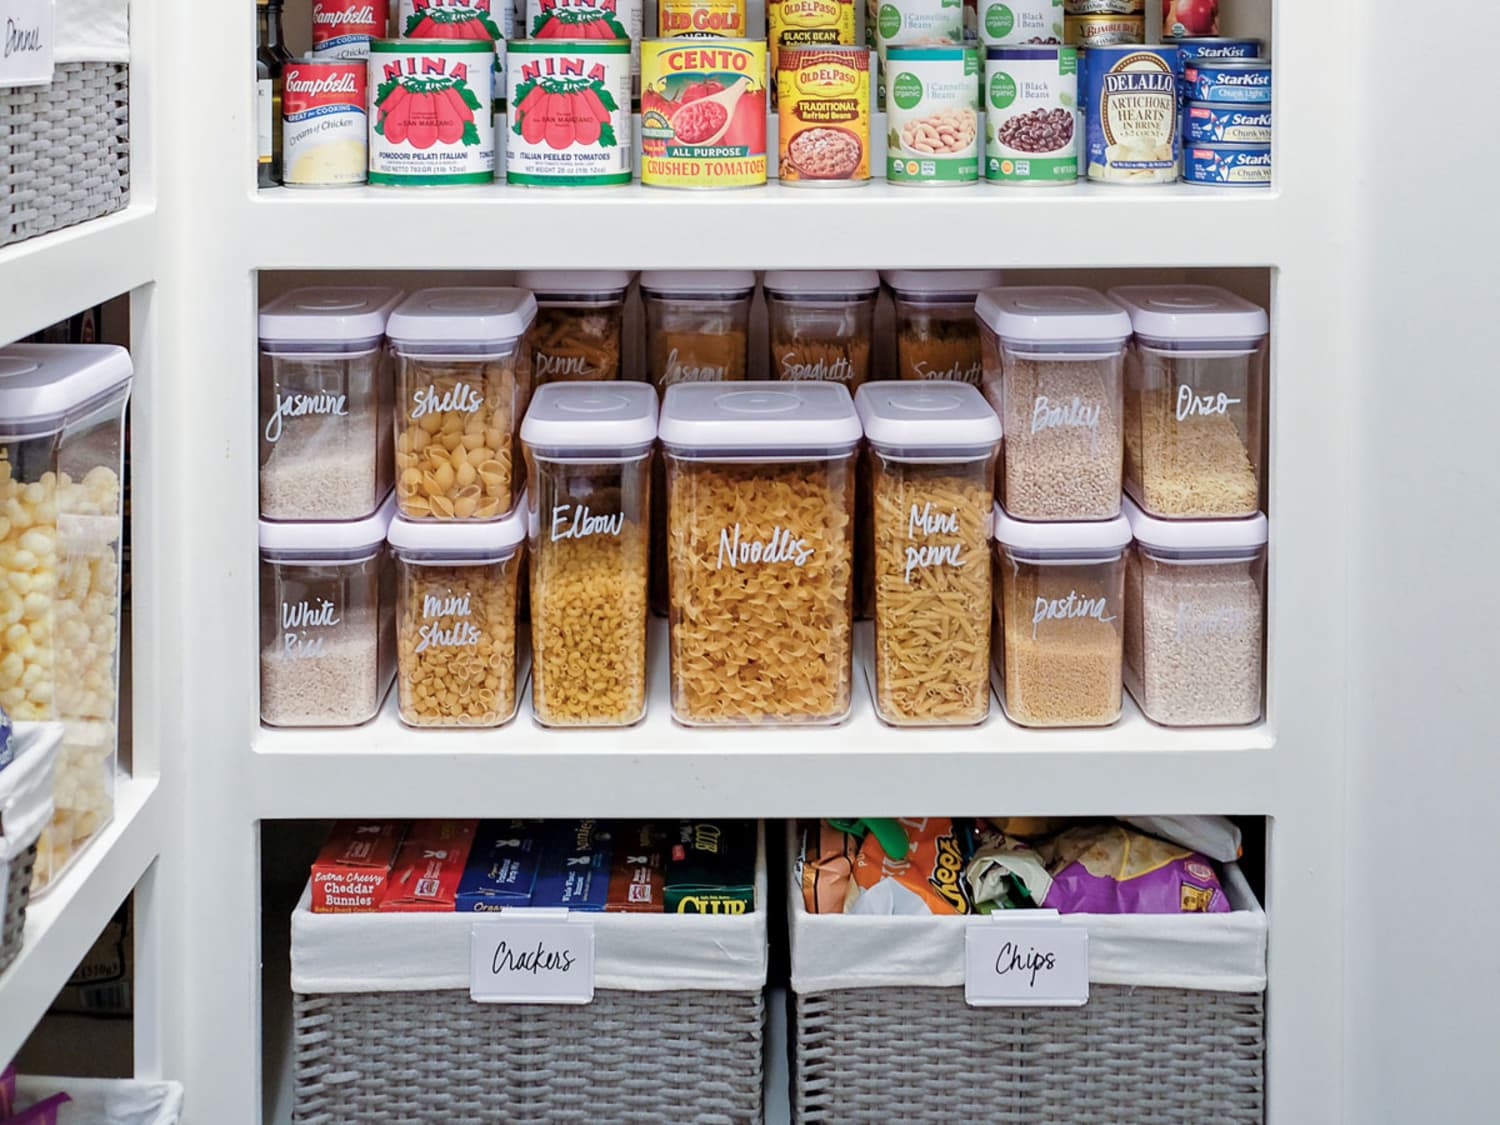 30 Of The Best Organizing Hacks From People Who Know What They're Doing